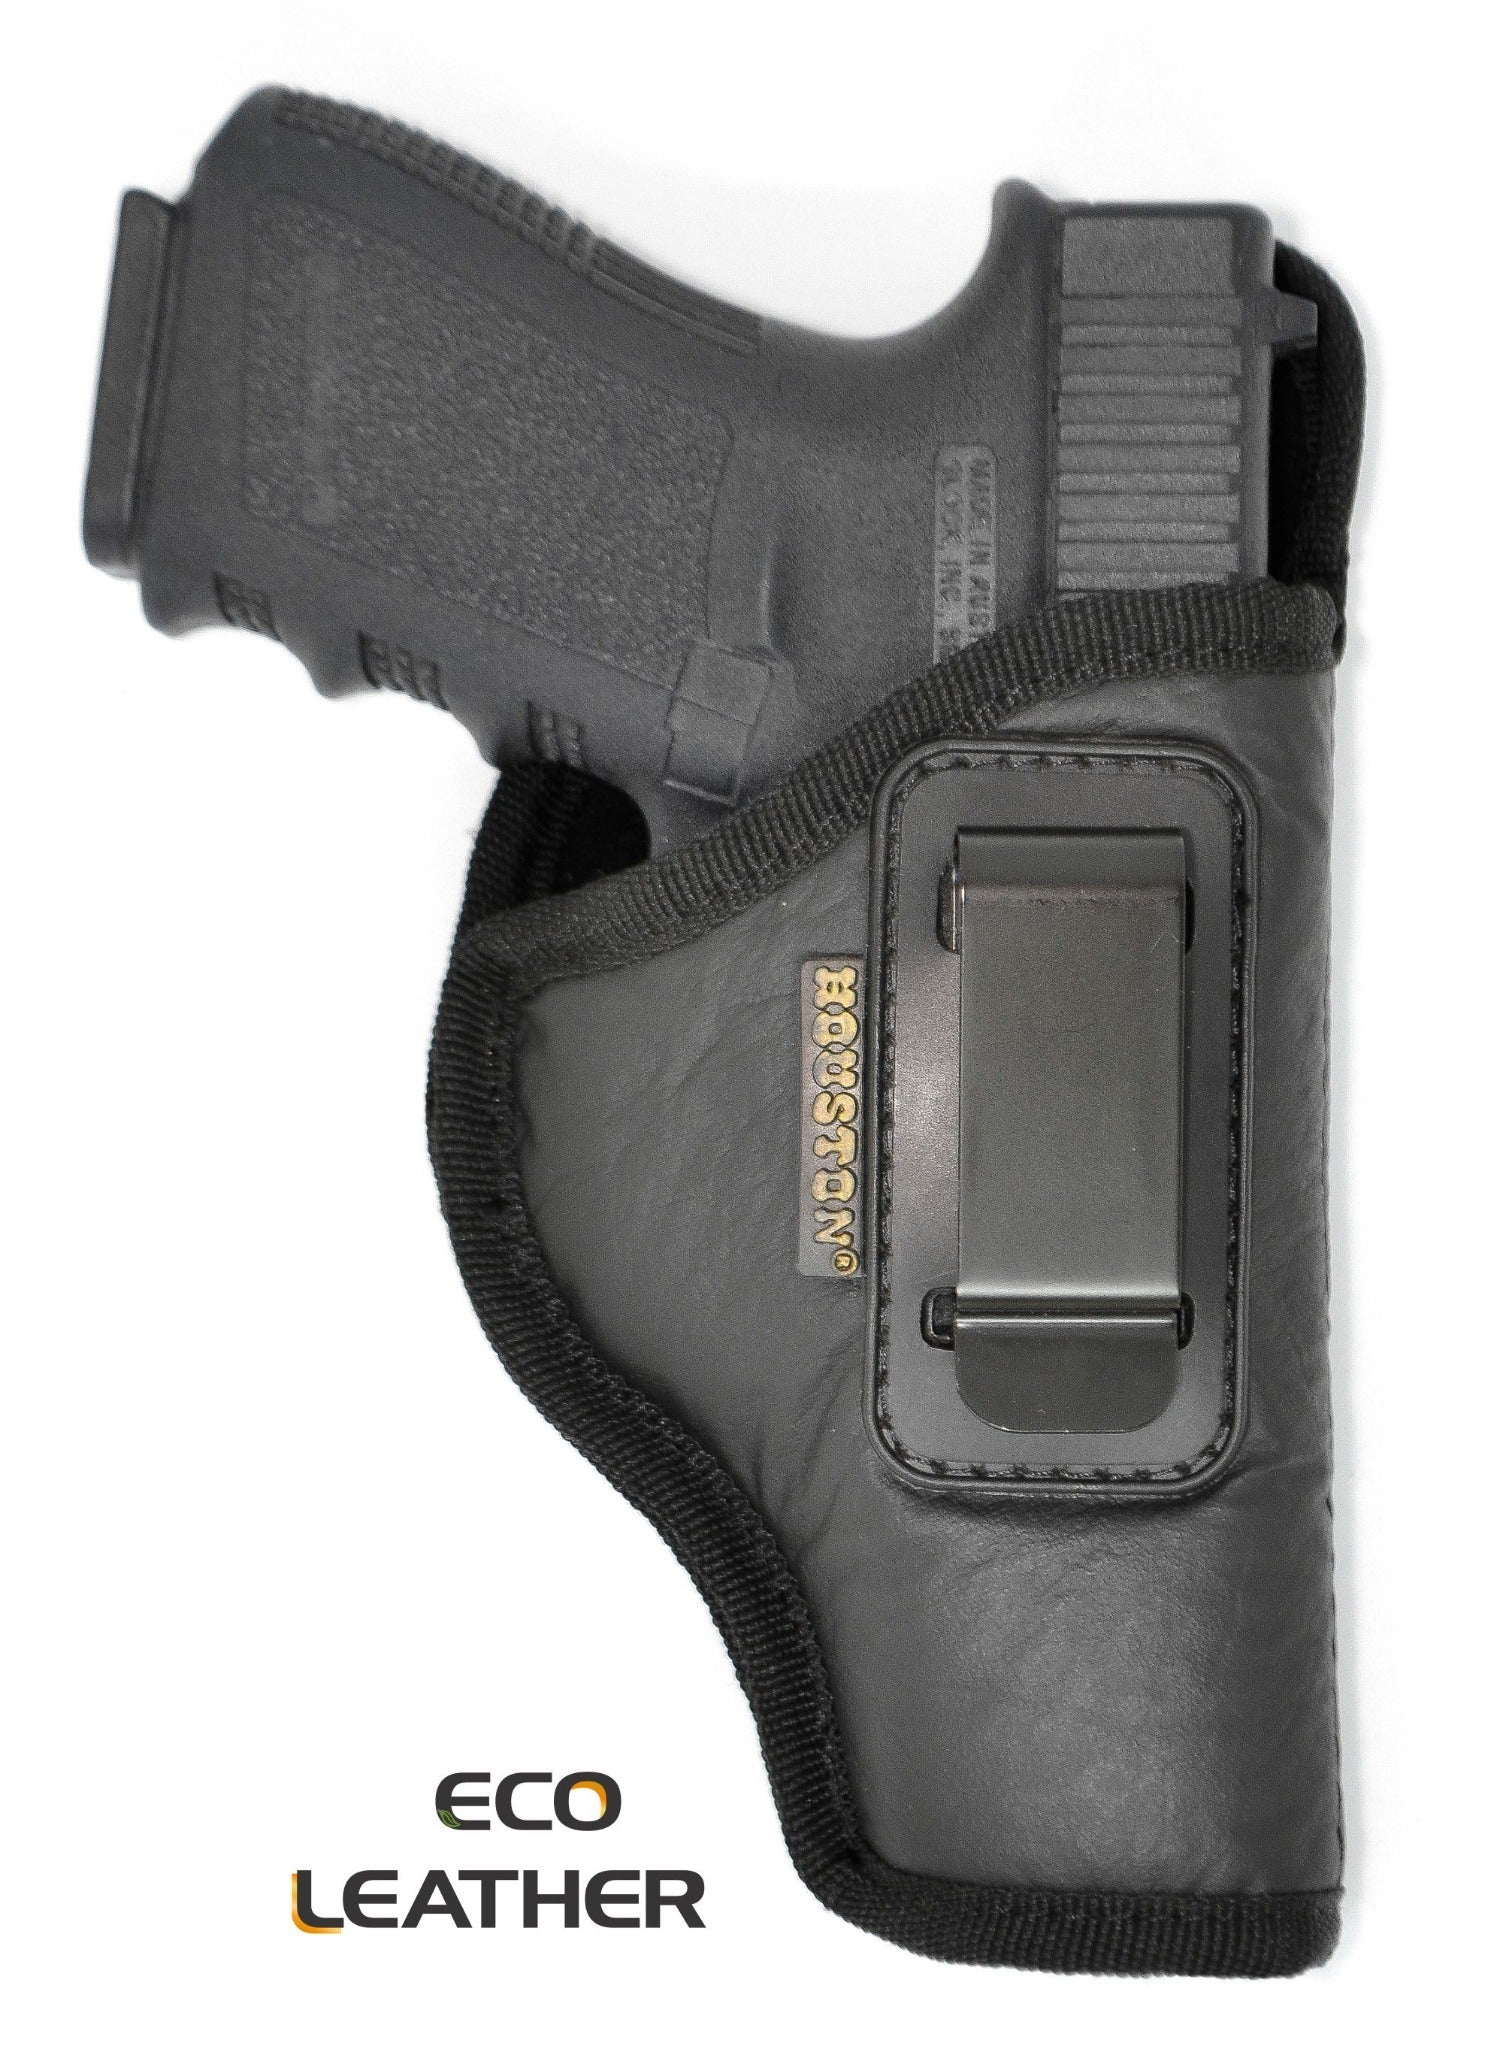 Inside the Waistband Holster - Complete Weapon Solutions